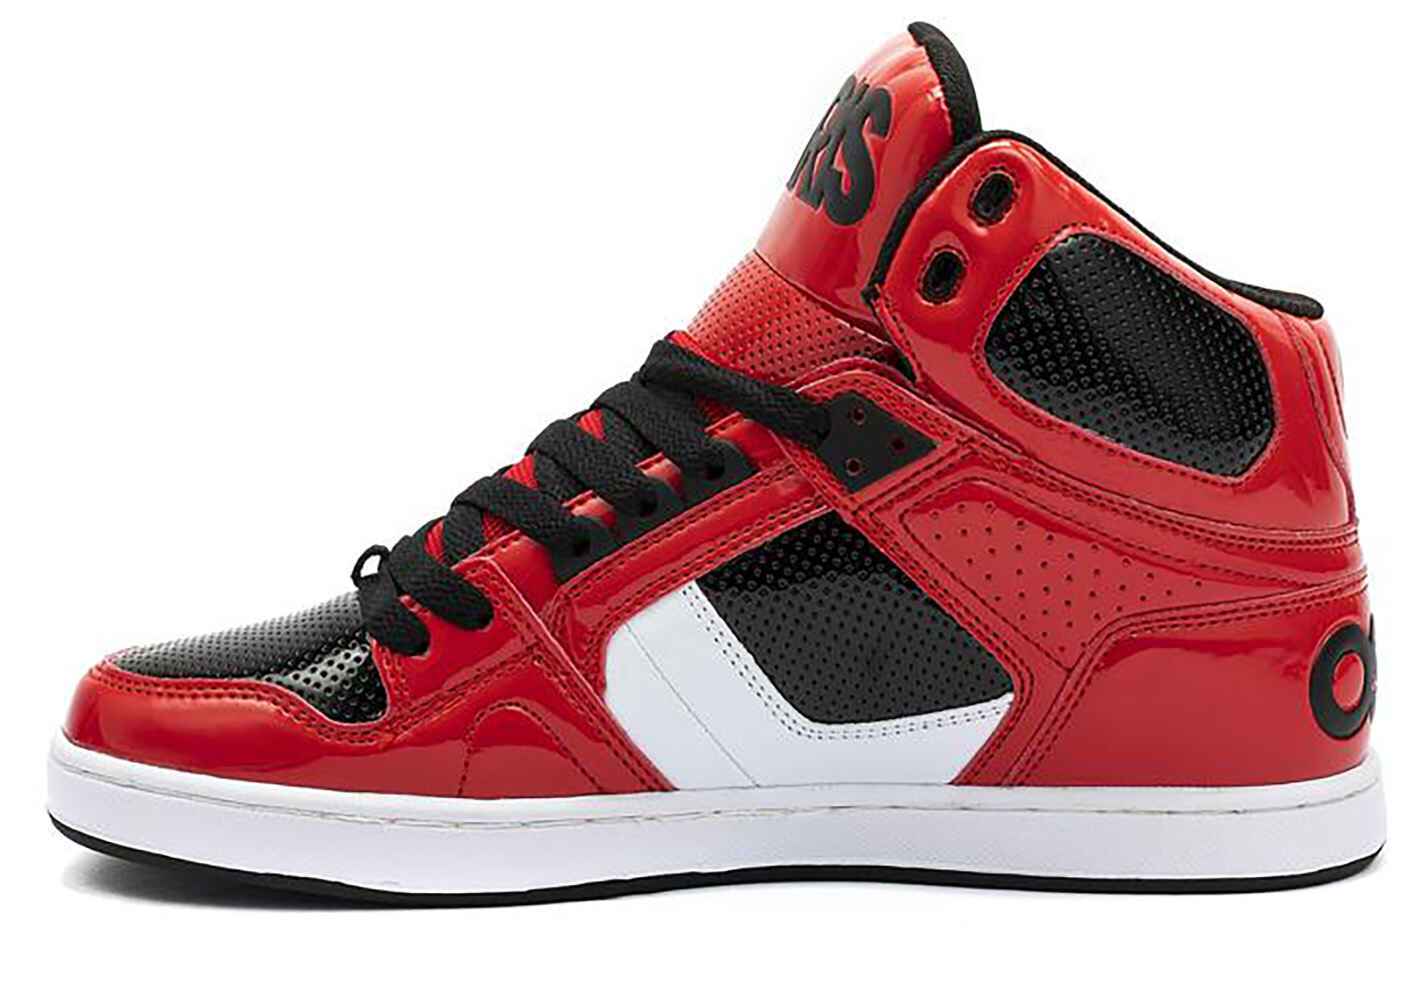 OSIRIS NYC83 CLK SHOE - RED / WHITE / BLACK - Footwear-Shoes : Sequence ...